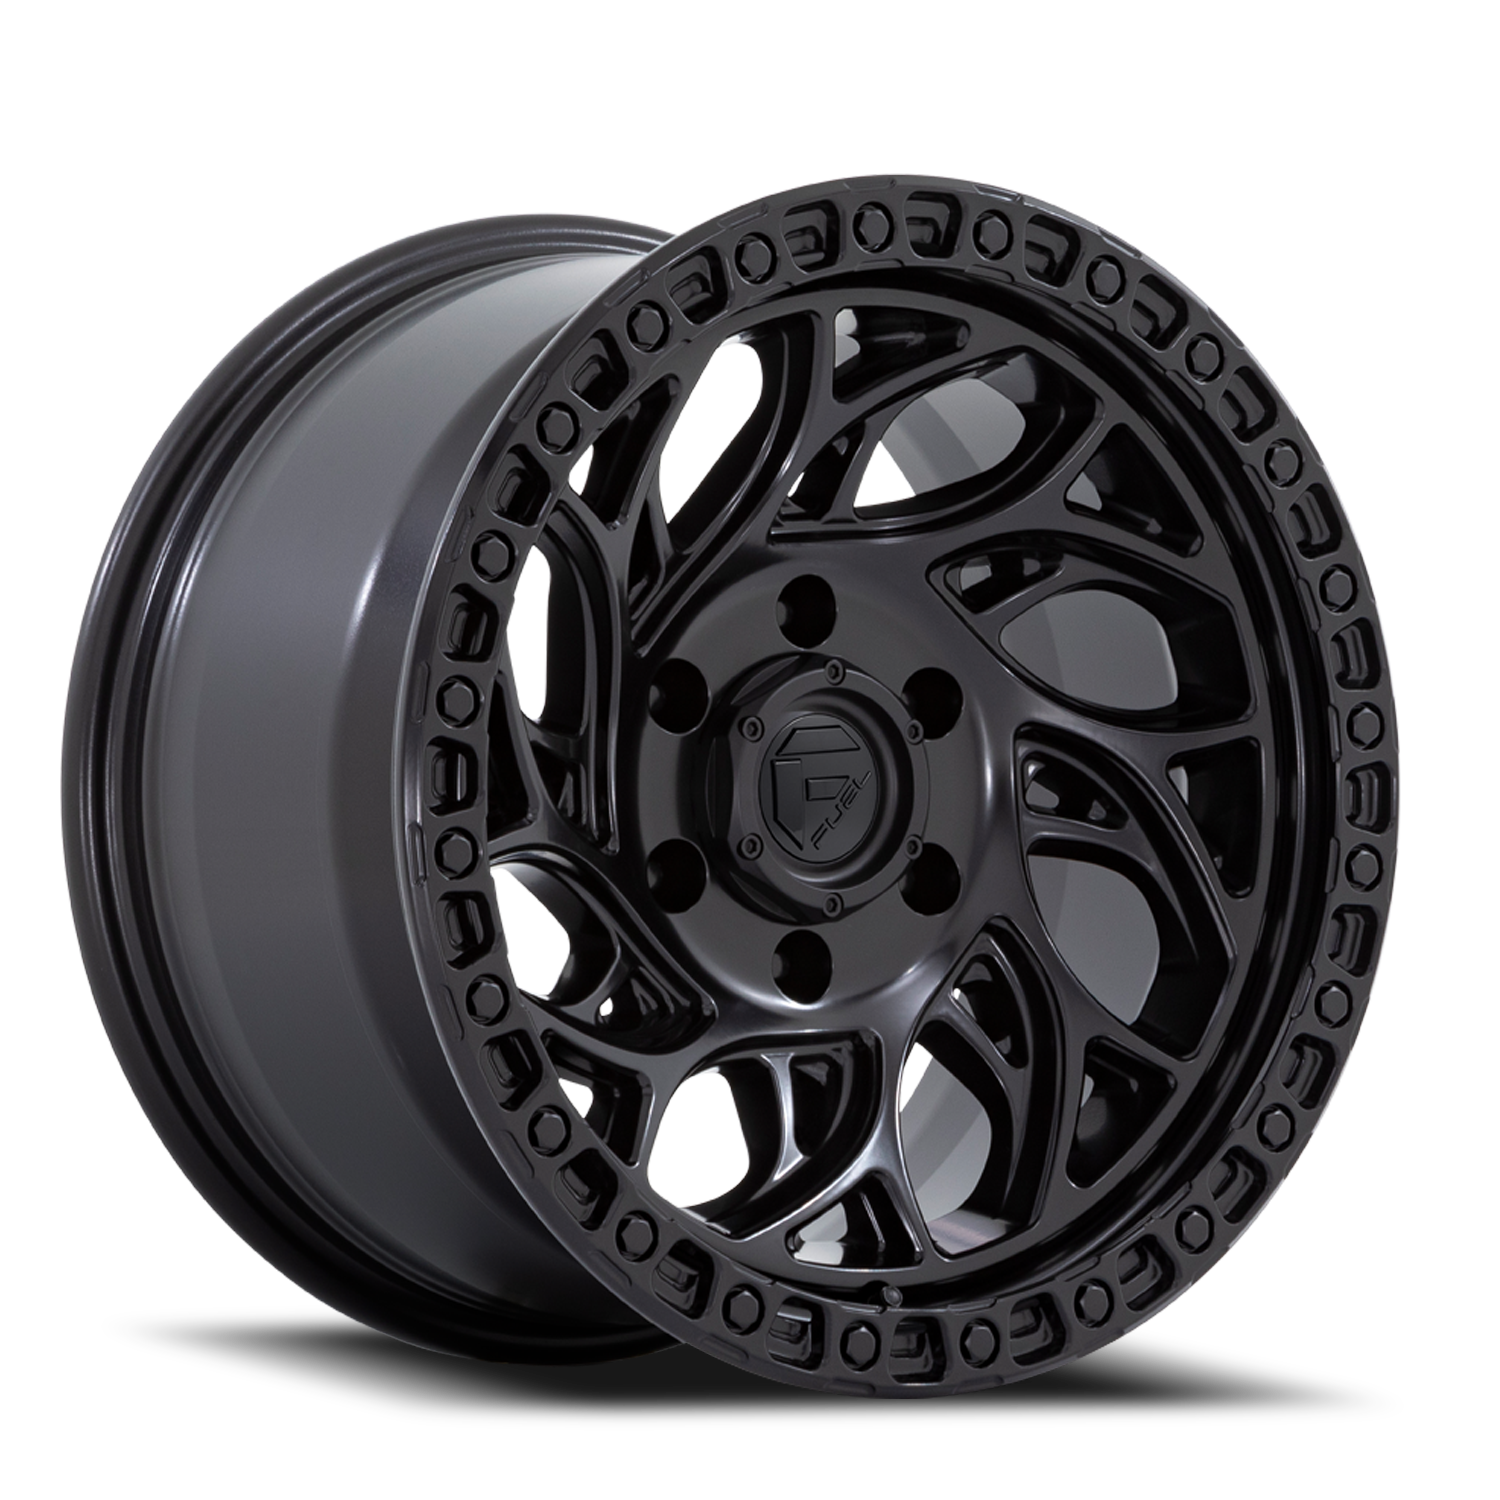 Aluminum Wheels 18X9 Runner OR D852 6 On 135 Blackout 87.1 Bore -12 Offset Fuel Off Road Wheels